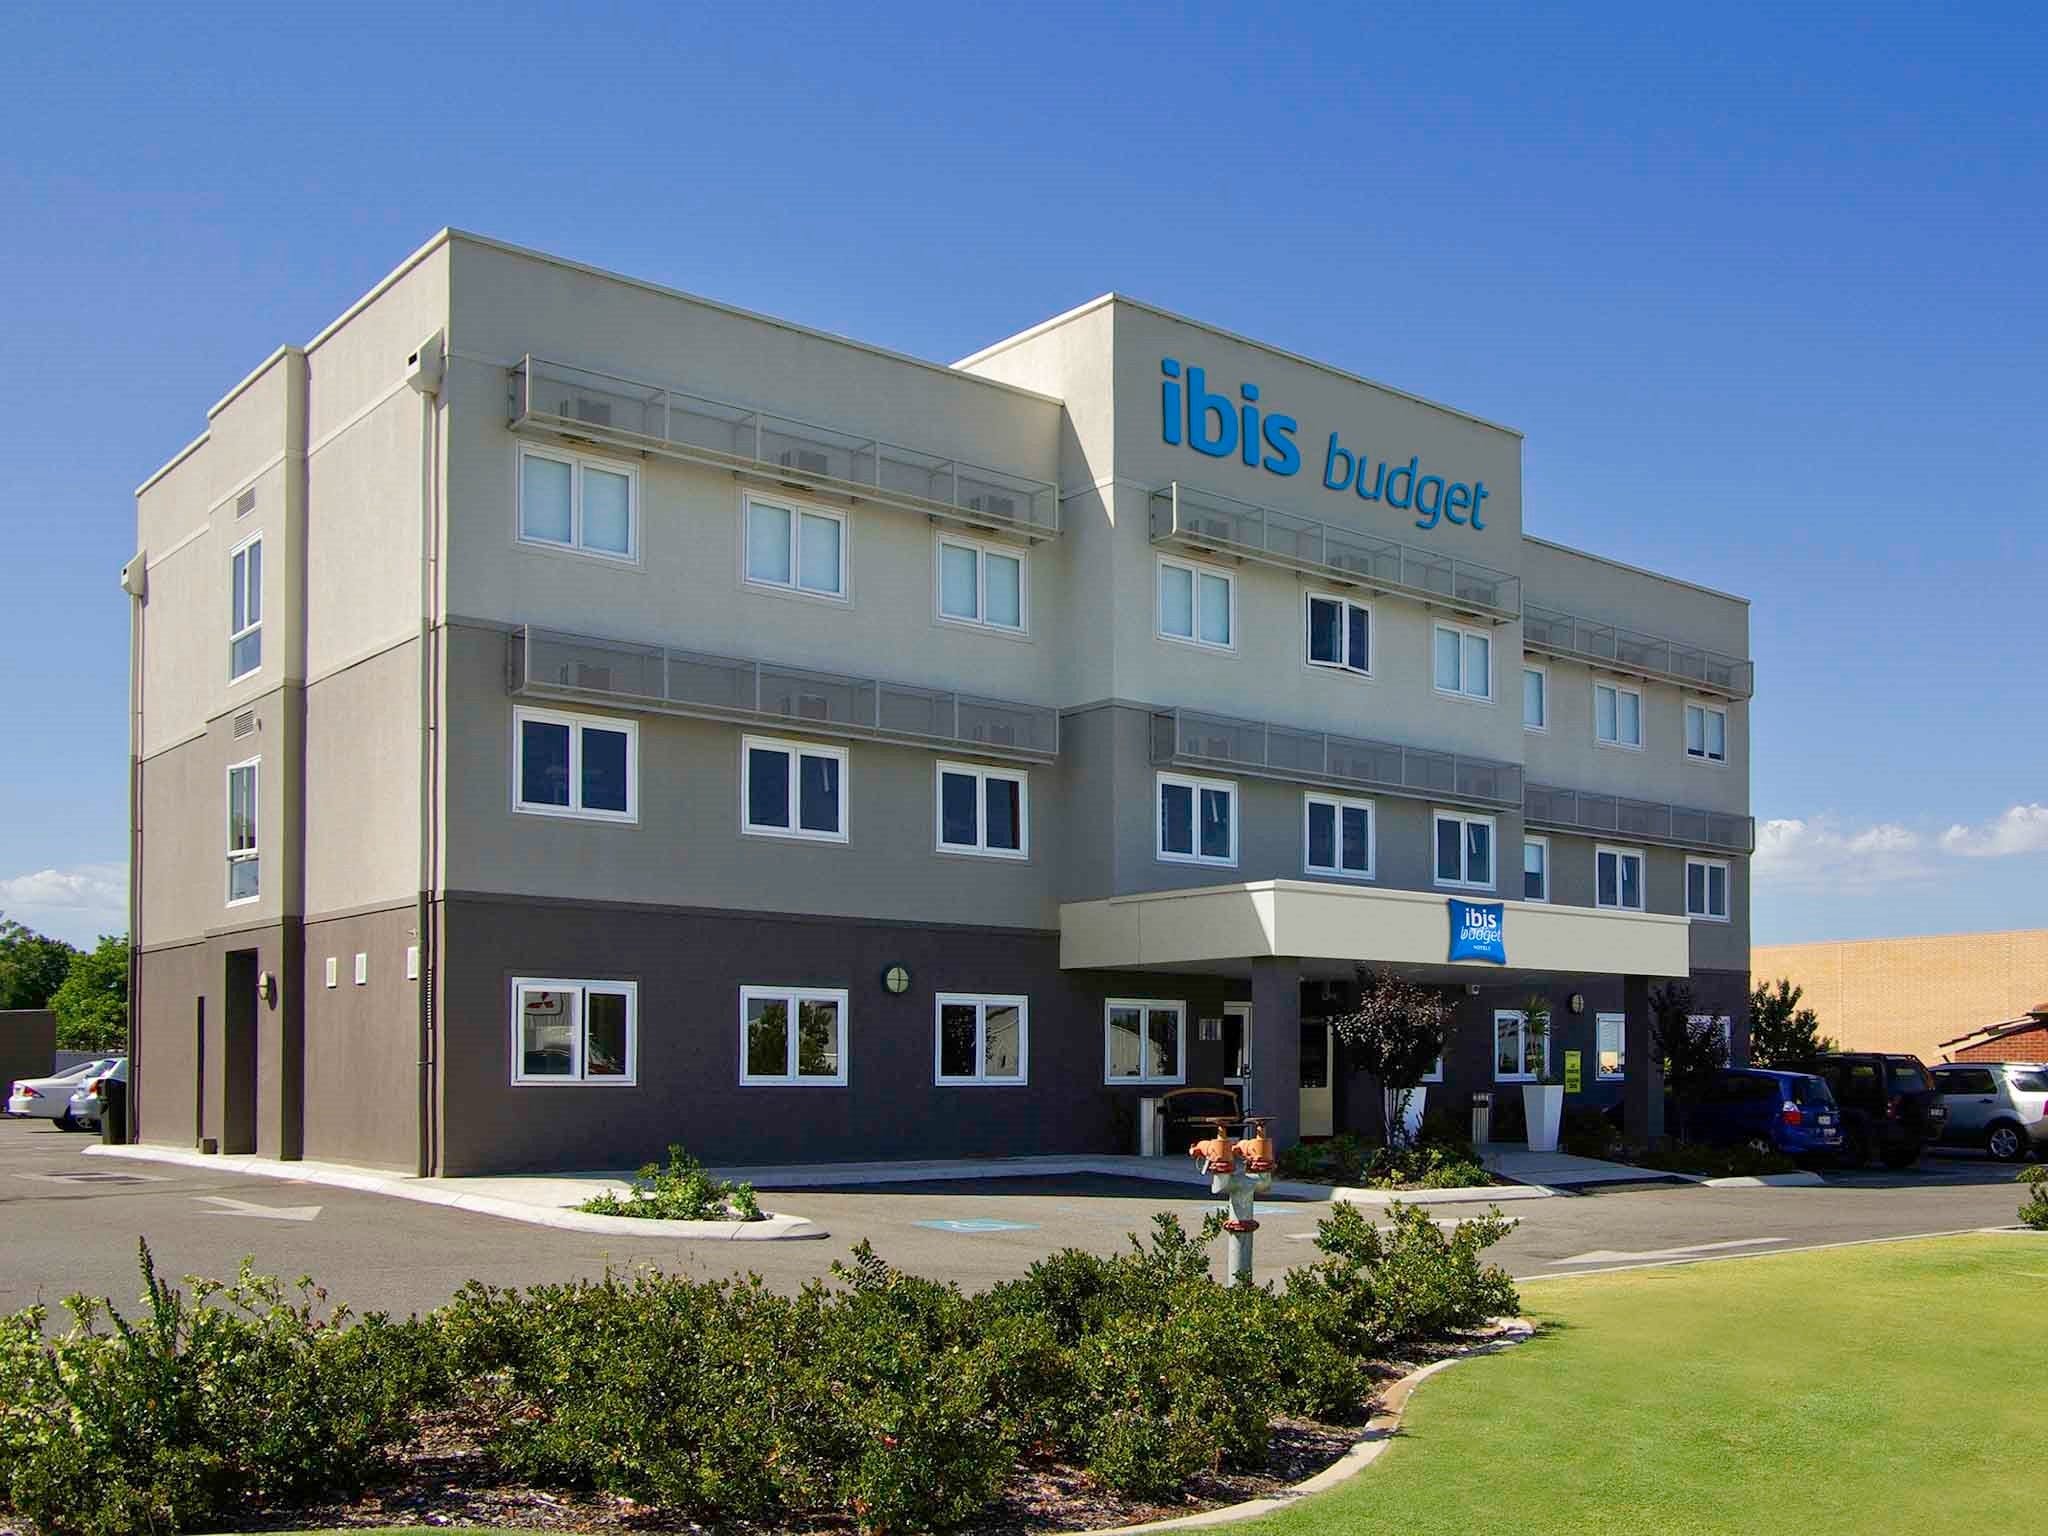 Ibis Budget - Perth Airport - Accommodation in Surfers Paradise